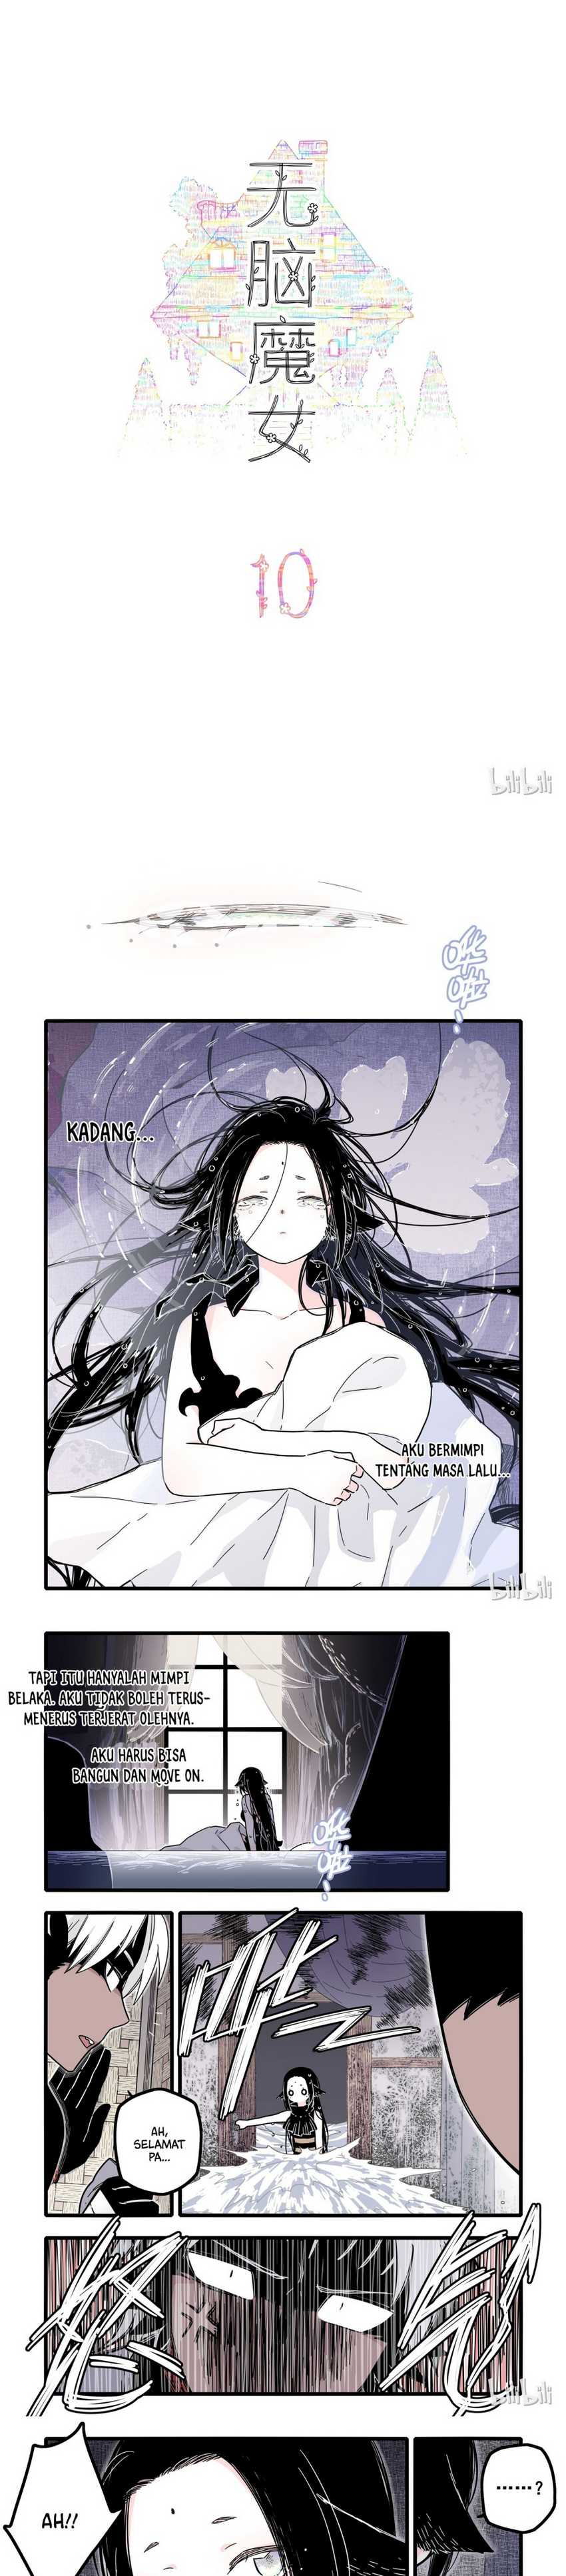 Brainless Witch Chapter 10 2